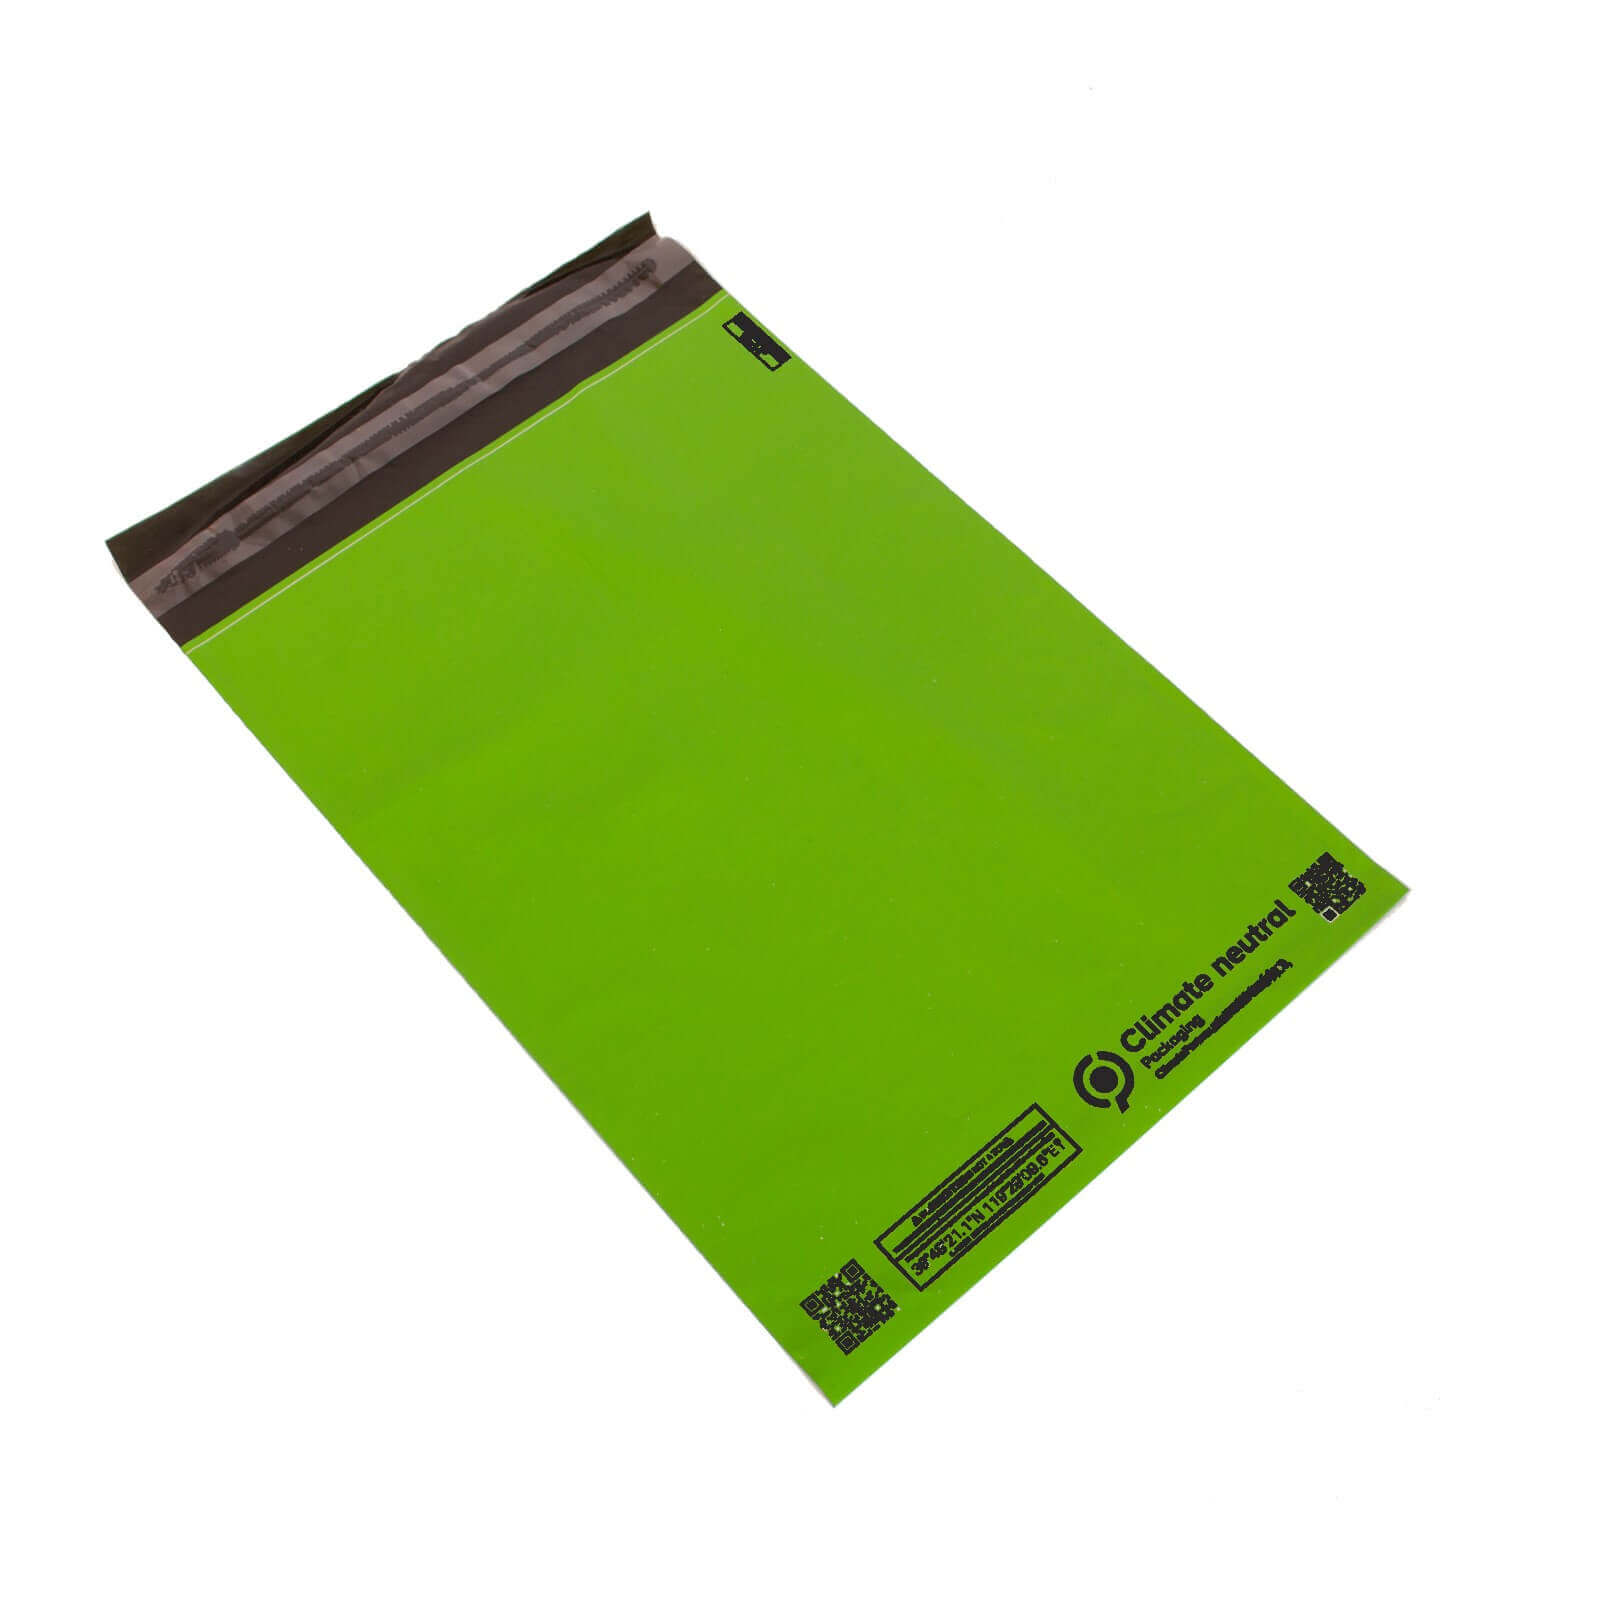 Full-back image of 17 x 22 green sustainable Mailing Bag